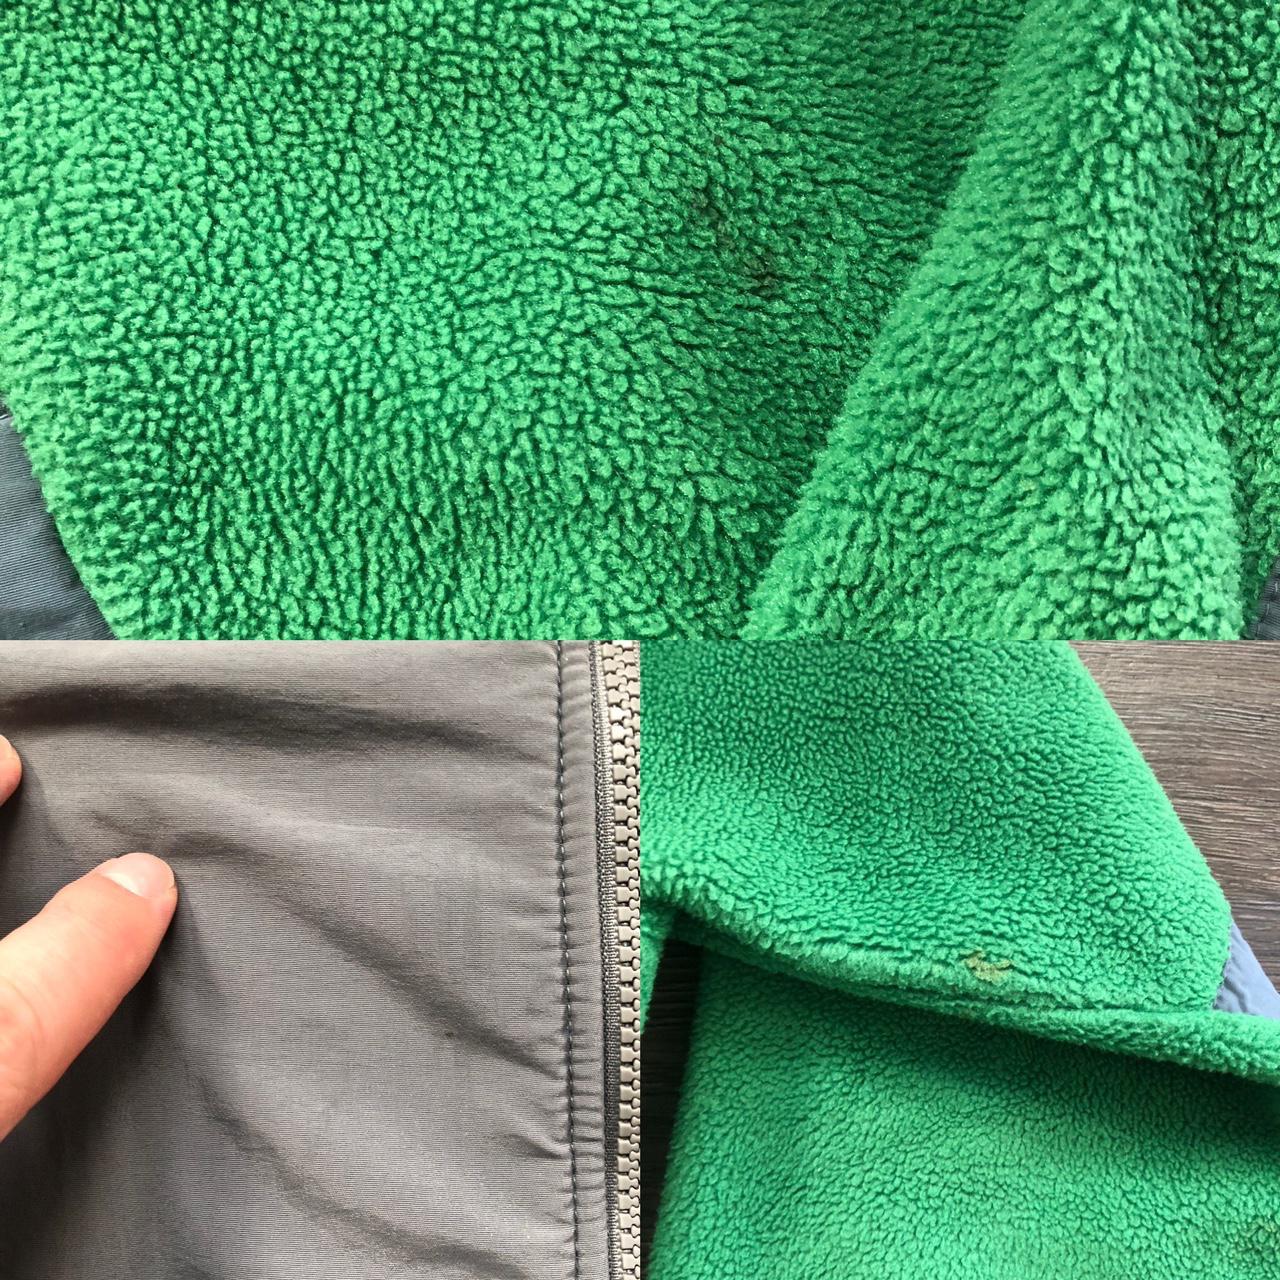 The North Face Women's Grey and Green Jacket (4)